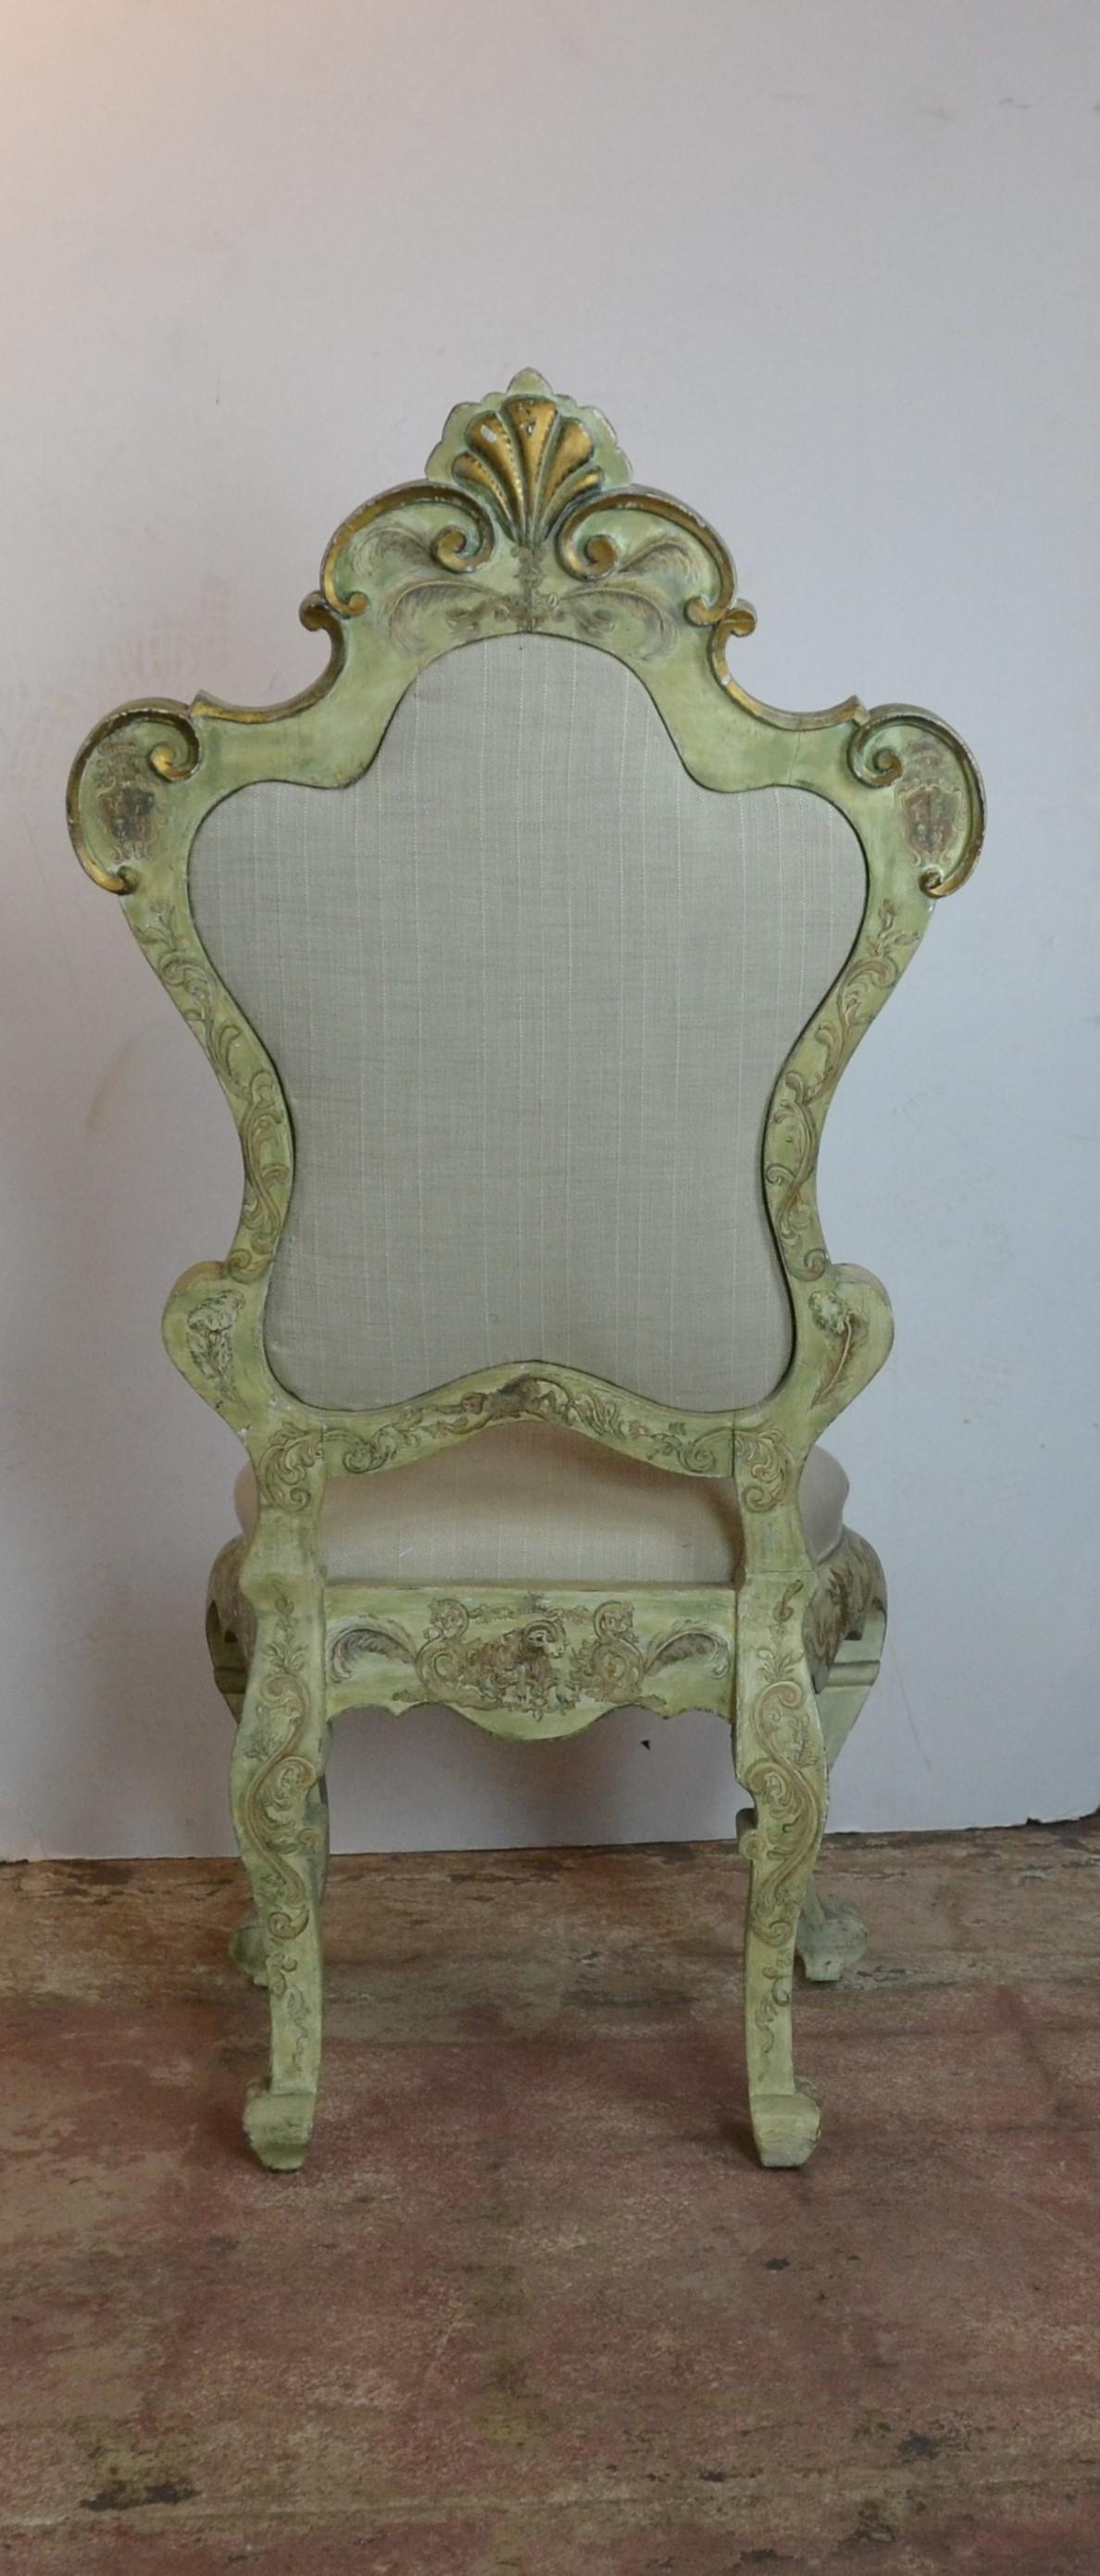 Pair of hand painted Italian chairs. Upholstered in linen.